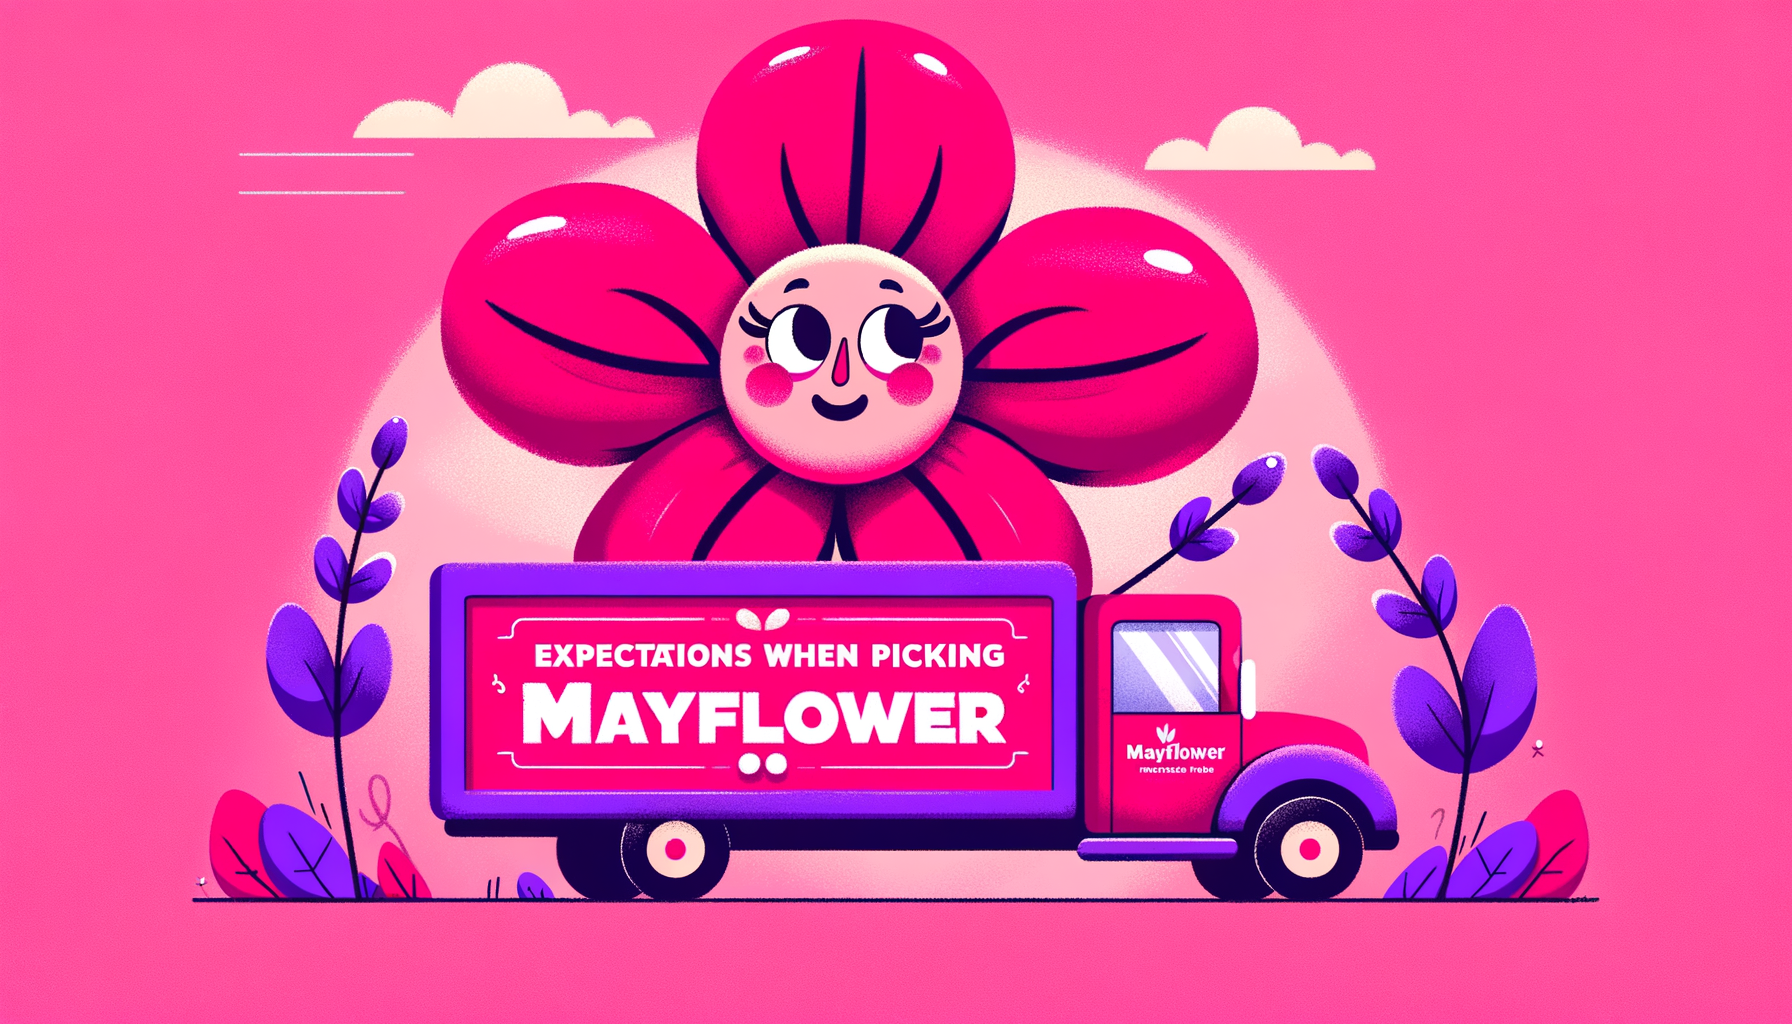 Cartoon-like illustration of a fuschia-colored Mayflower moving truck, symbolizing a review of Mayflower moving services.